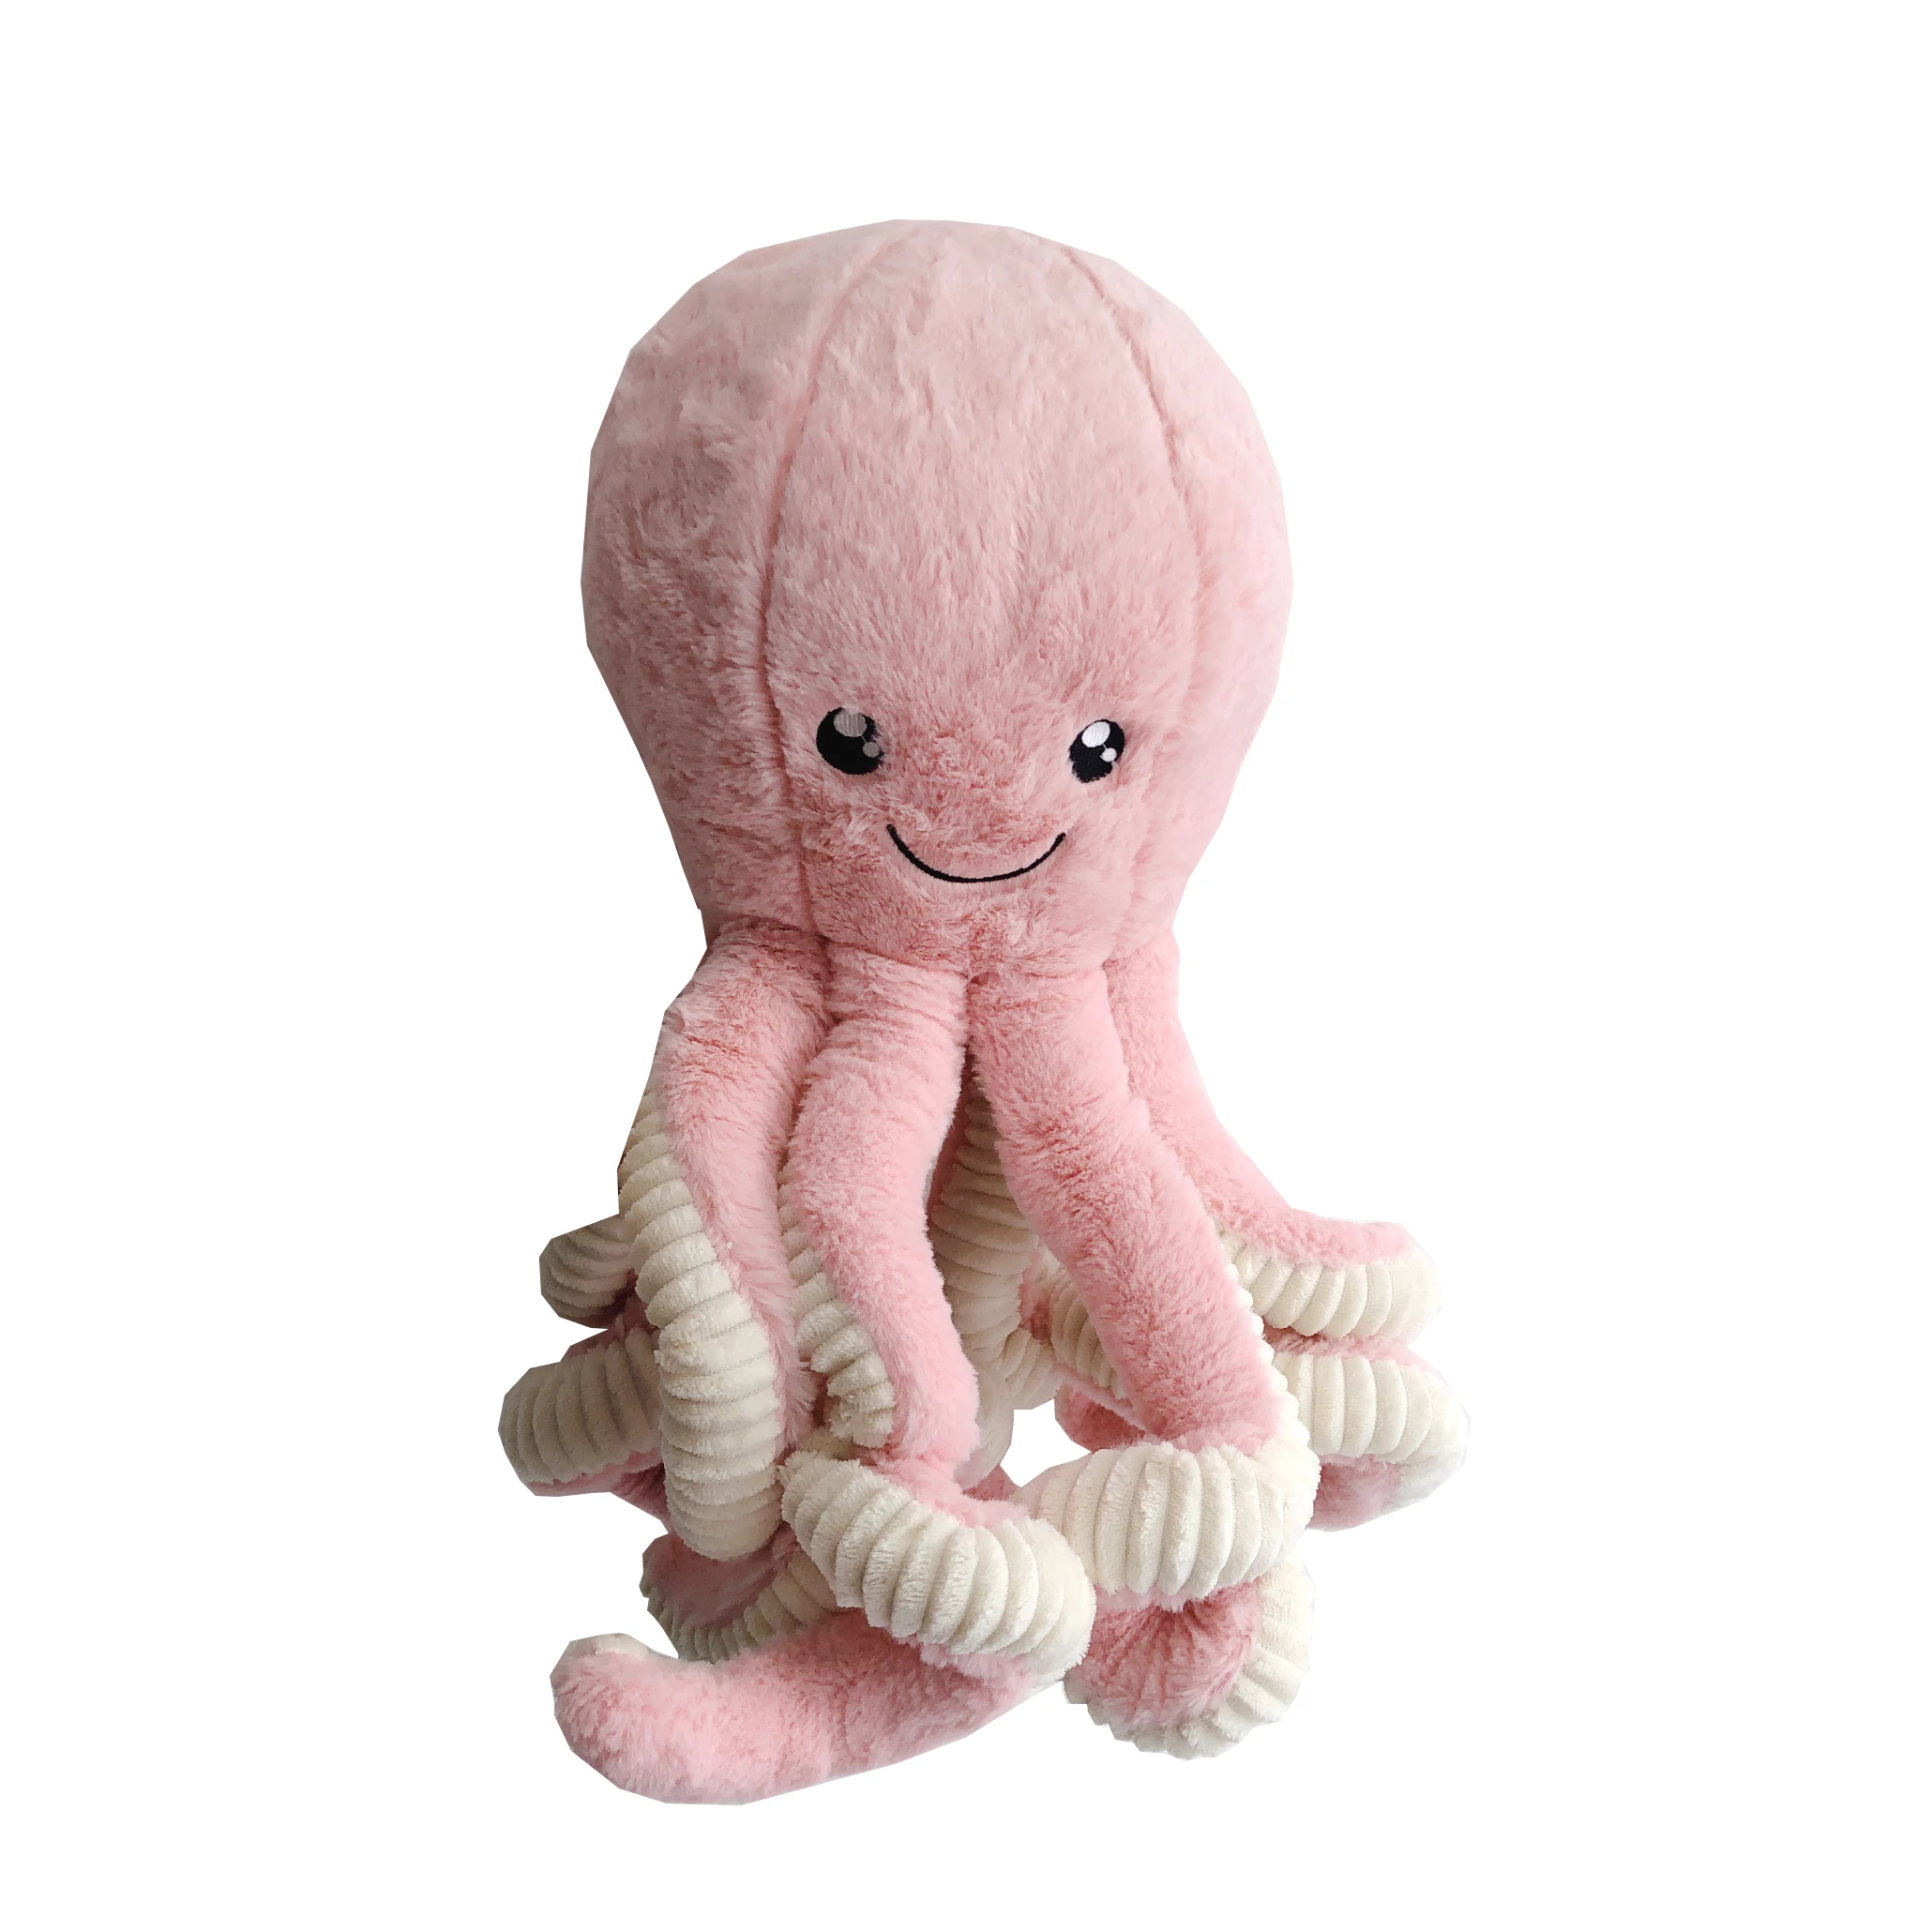 Super Lovely Simulation octopus Pendant Plush Stuffed Toy Soft Deer Animal Home Accessories Cute Animal Doll Children Gifts